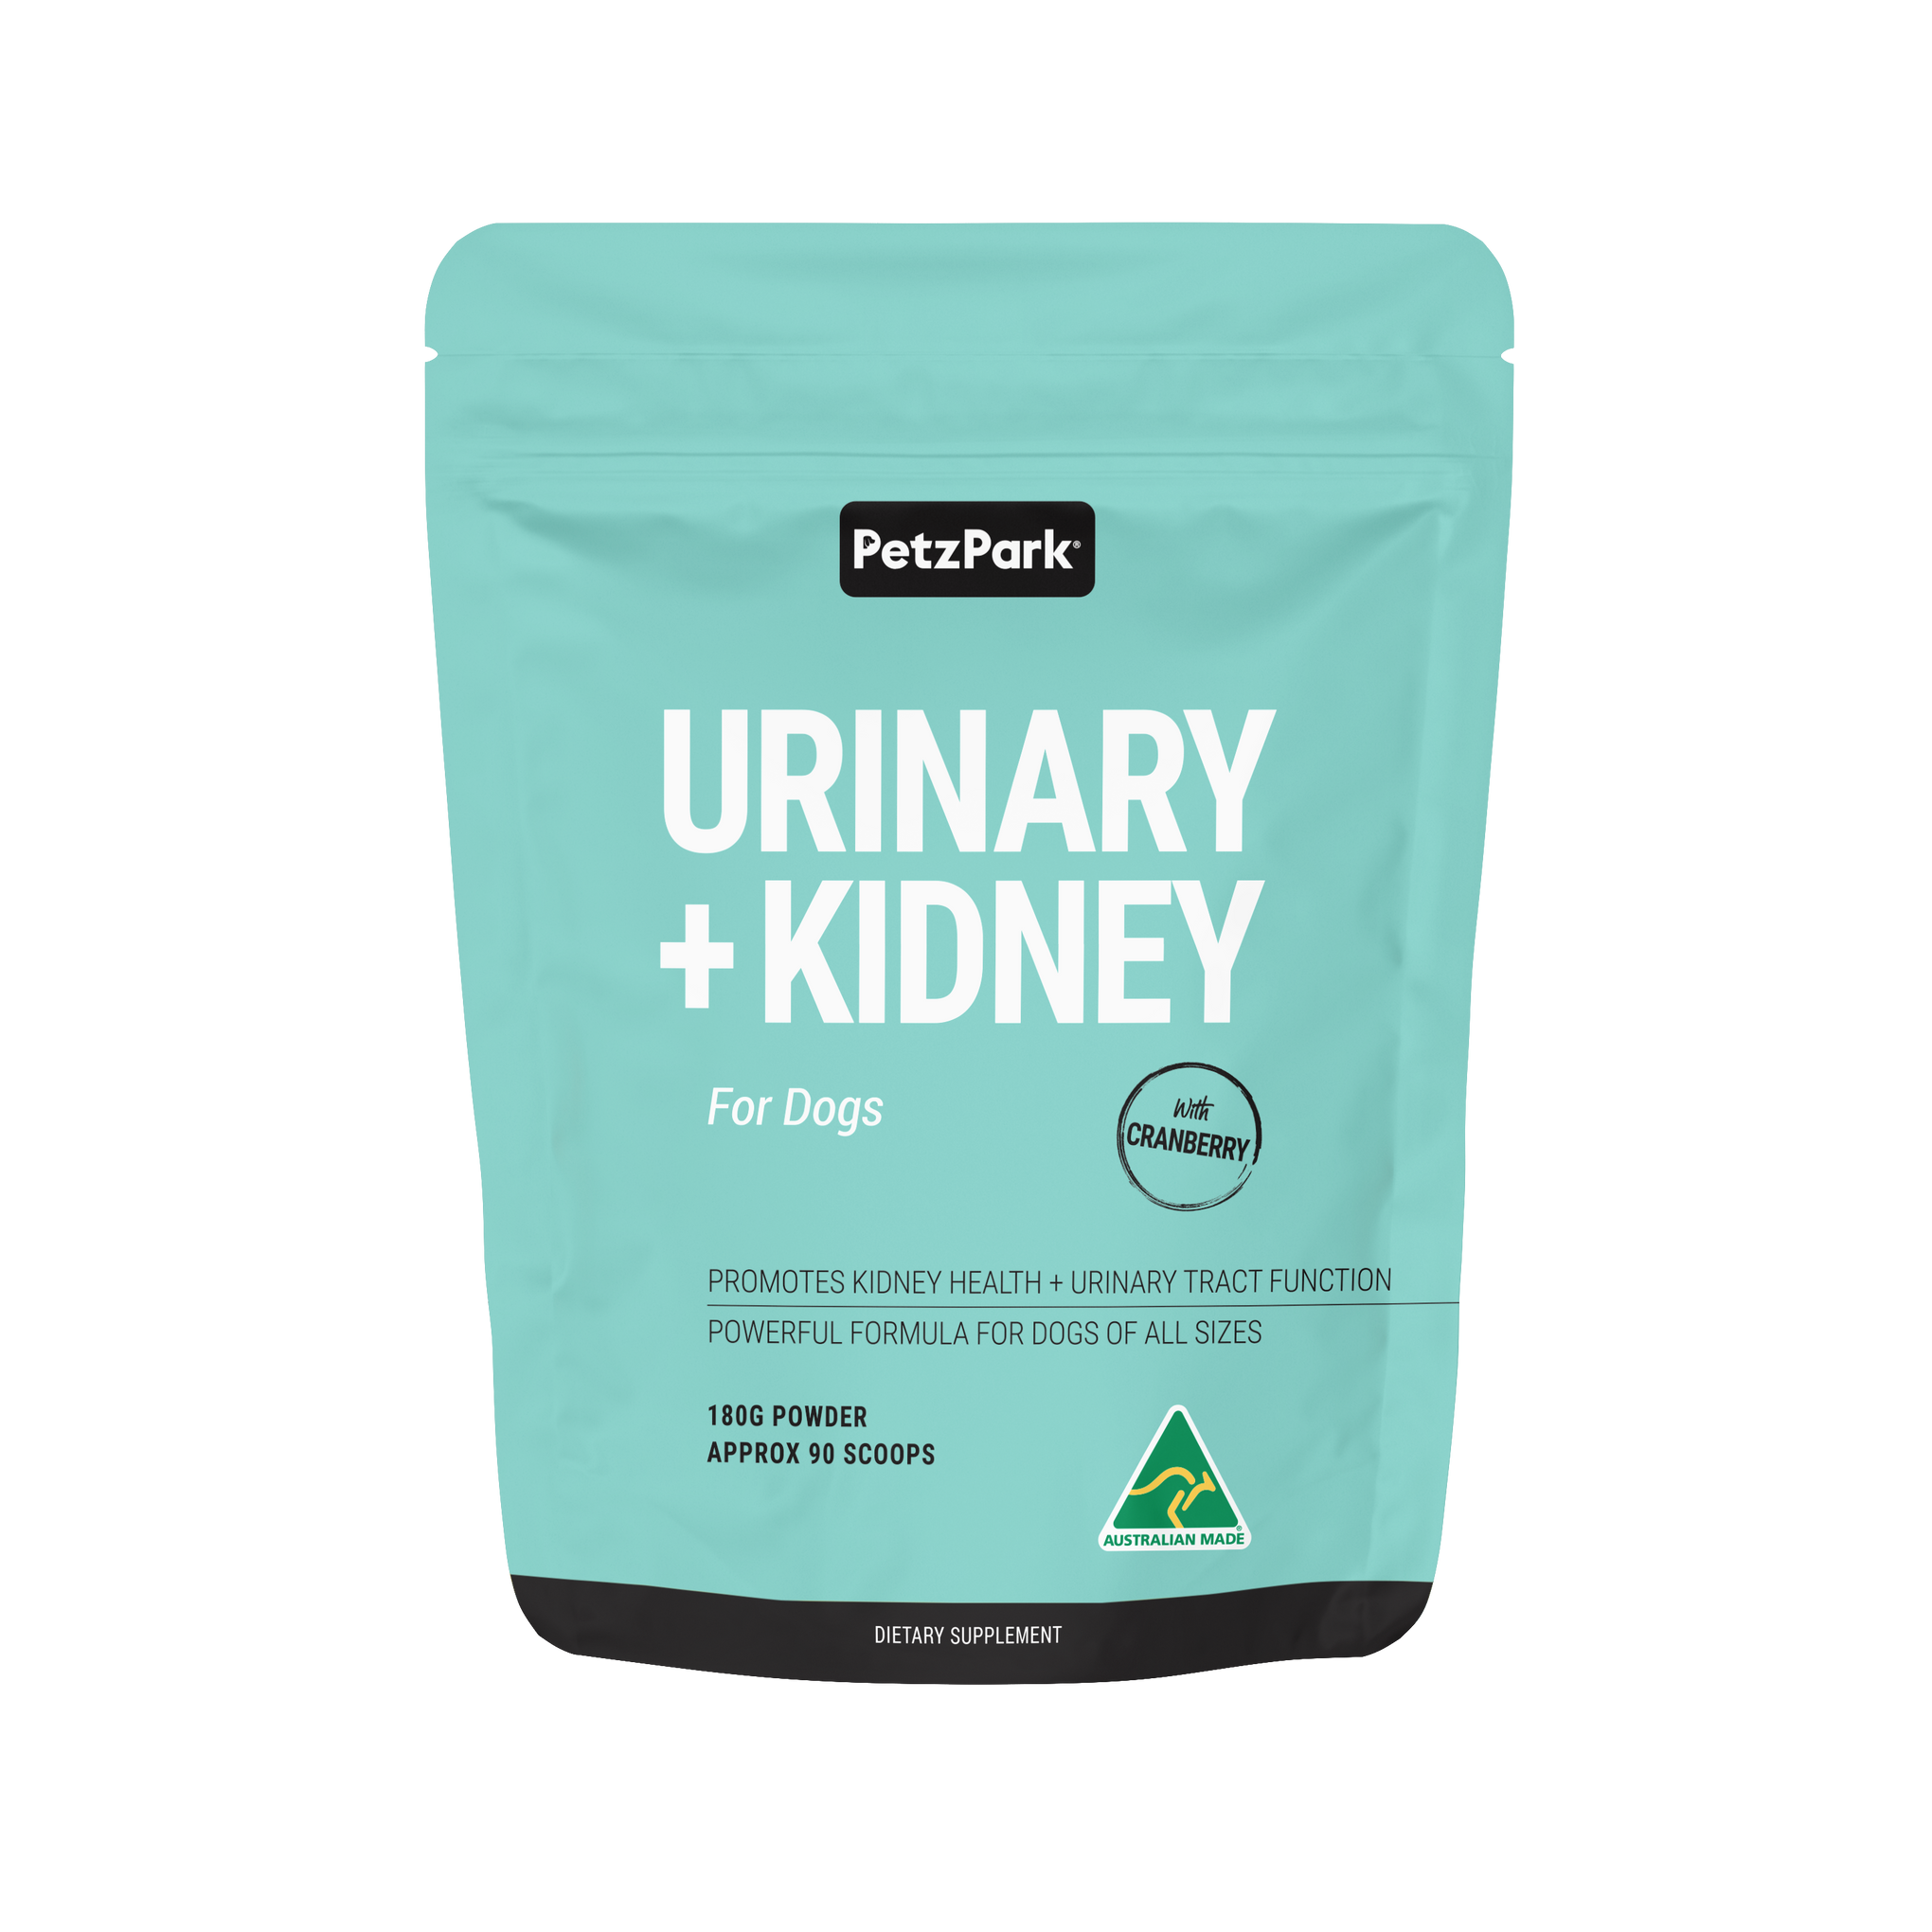 Petz Park Urinary + Kidney for Dogs